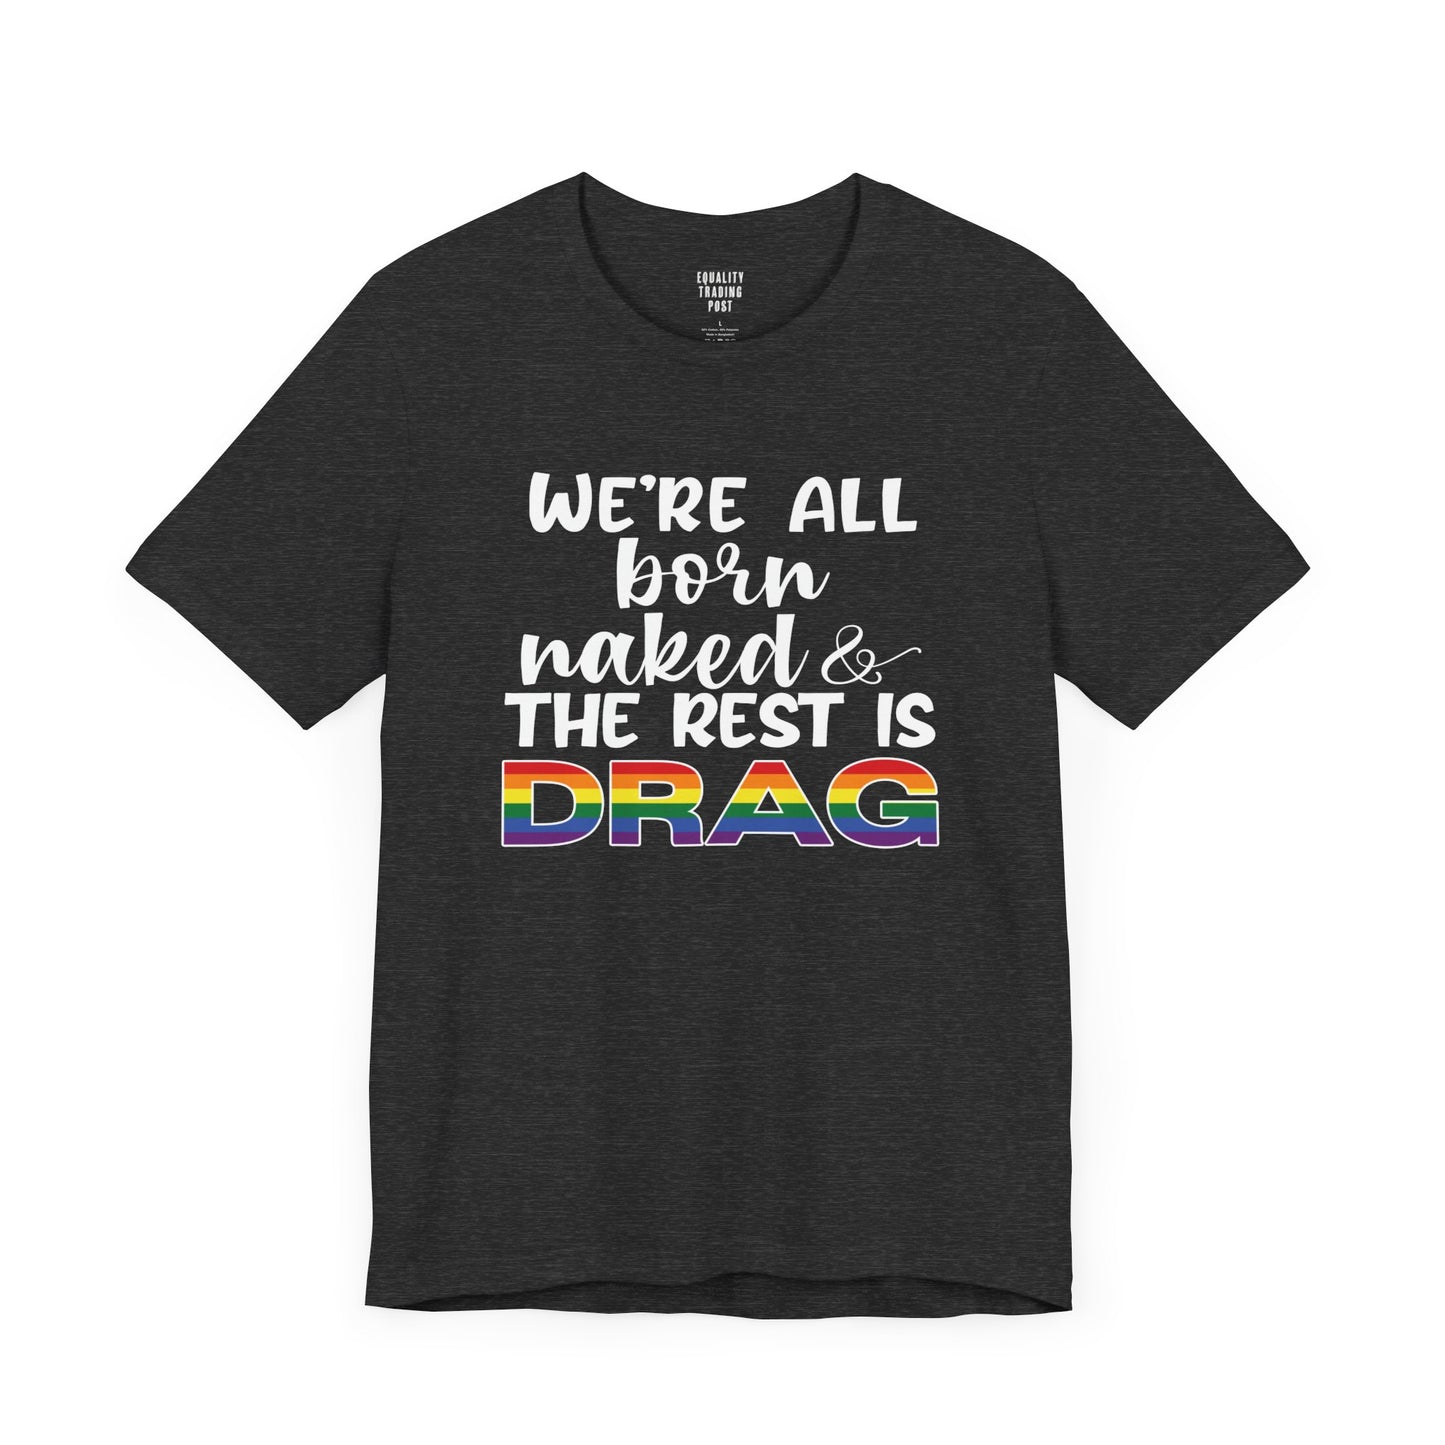 The Rest Is Drag Tee